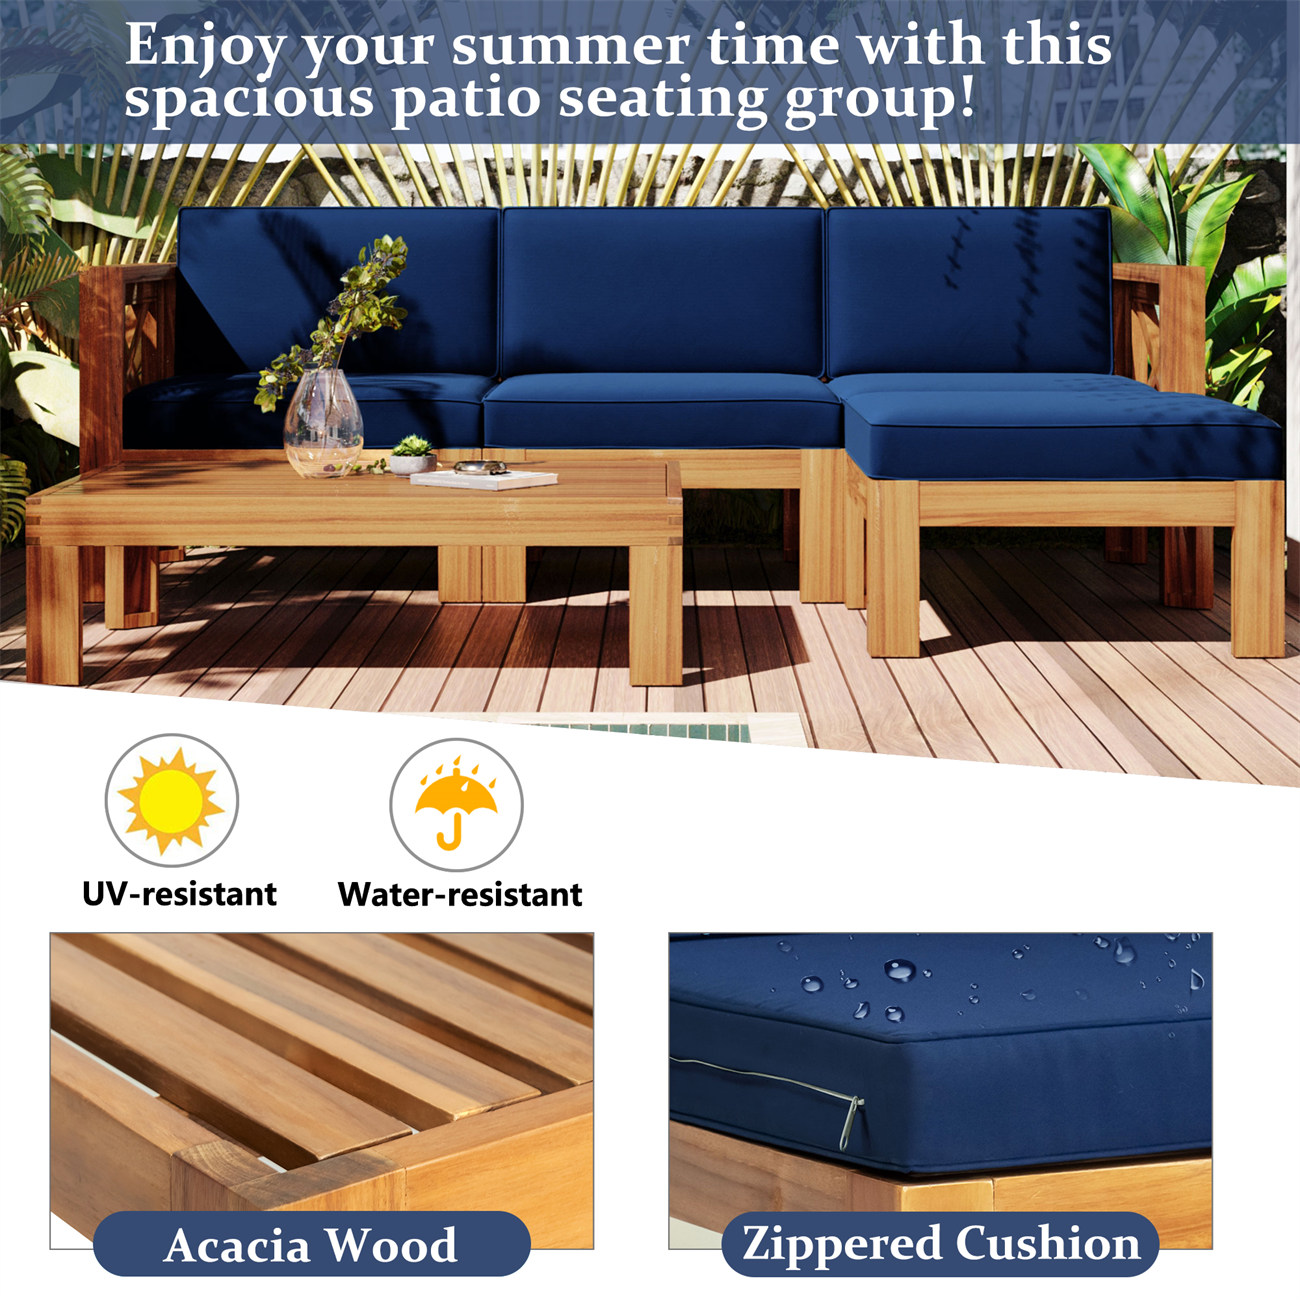 SEGMART 5 PCS Outdoor Acacia Wood Sofa Patio Furniture Set, Cushioned Sectional Sofa Set Chair with Ottoman and Coffee Table for Garden Balcony Poolside Living Room, Blue Cushions - image 3 of 10